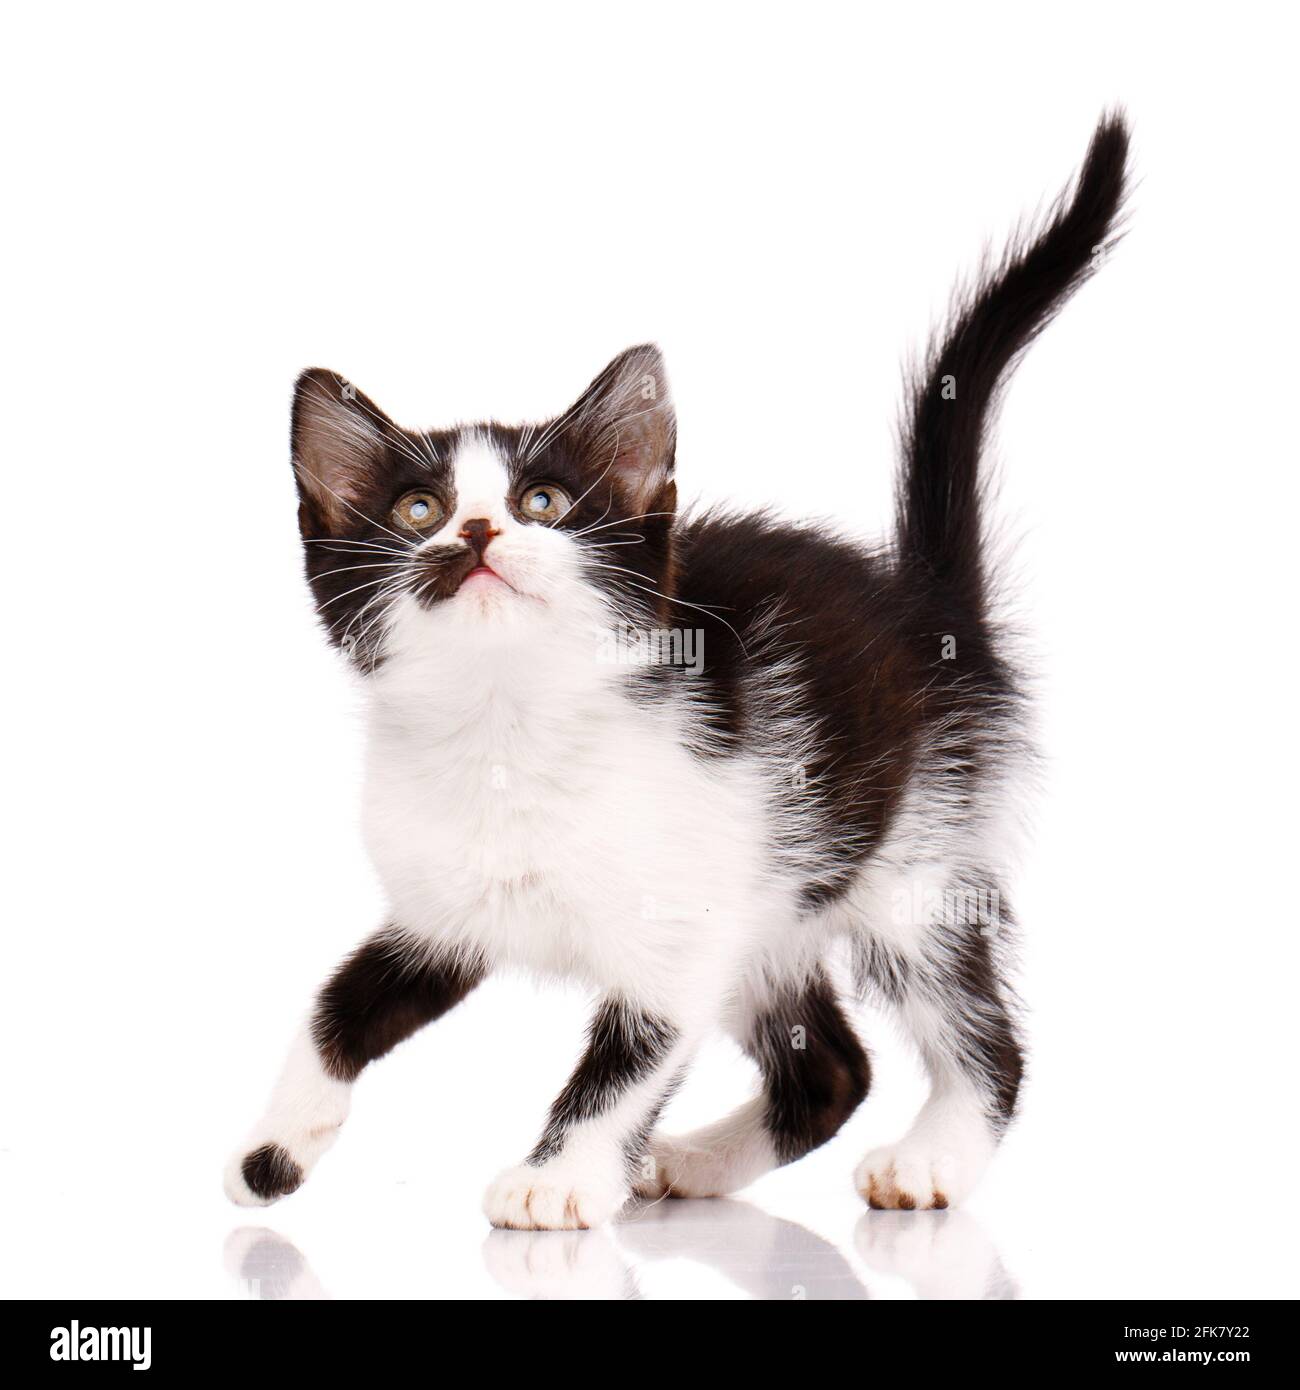 Very small playful black and white kitten is going to jump up on a white background. Kitten looks closely watching the target. Stock Photo